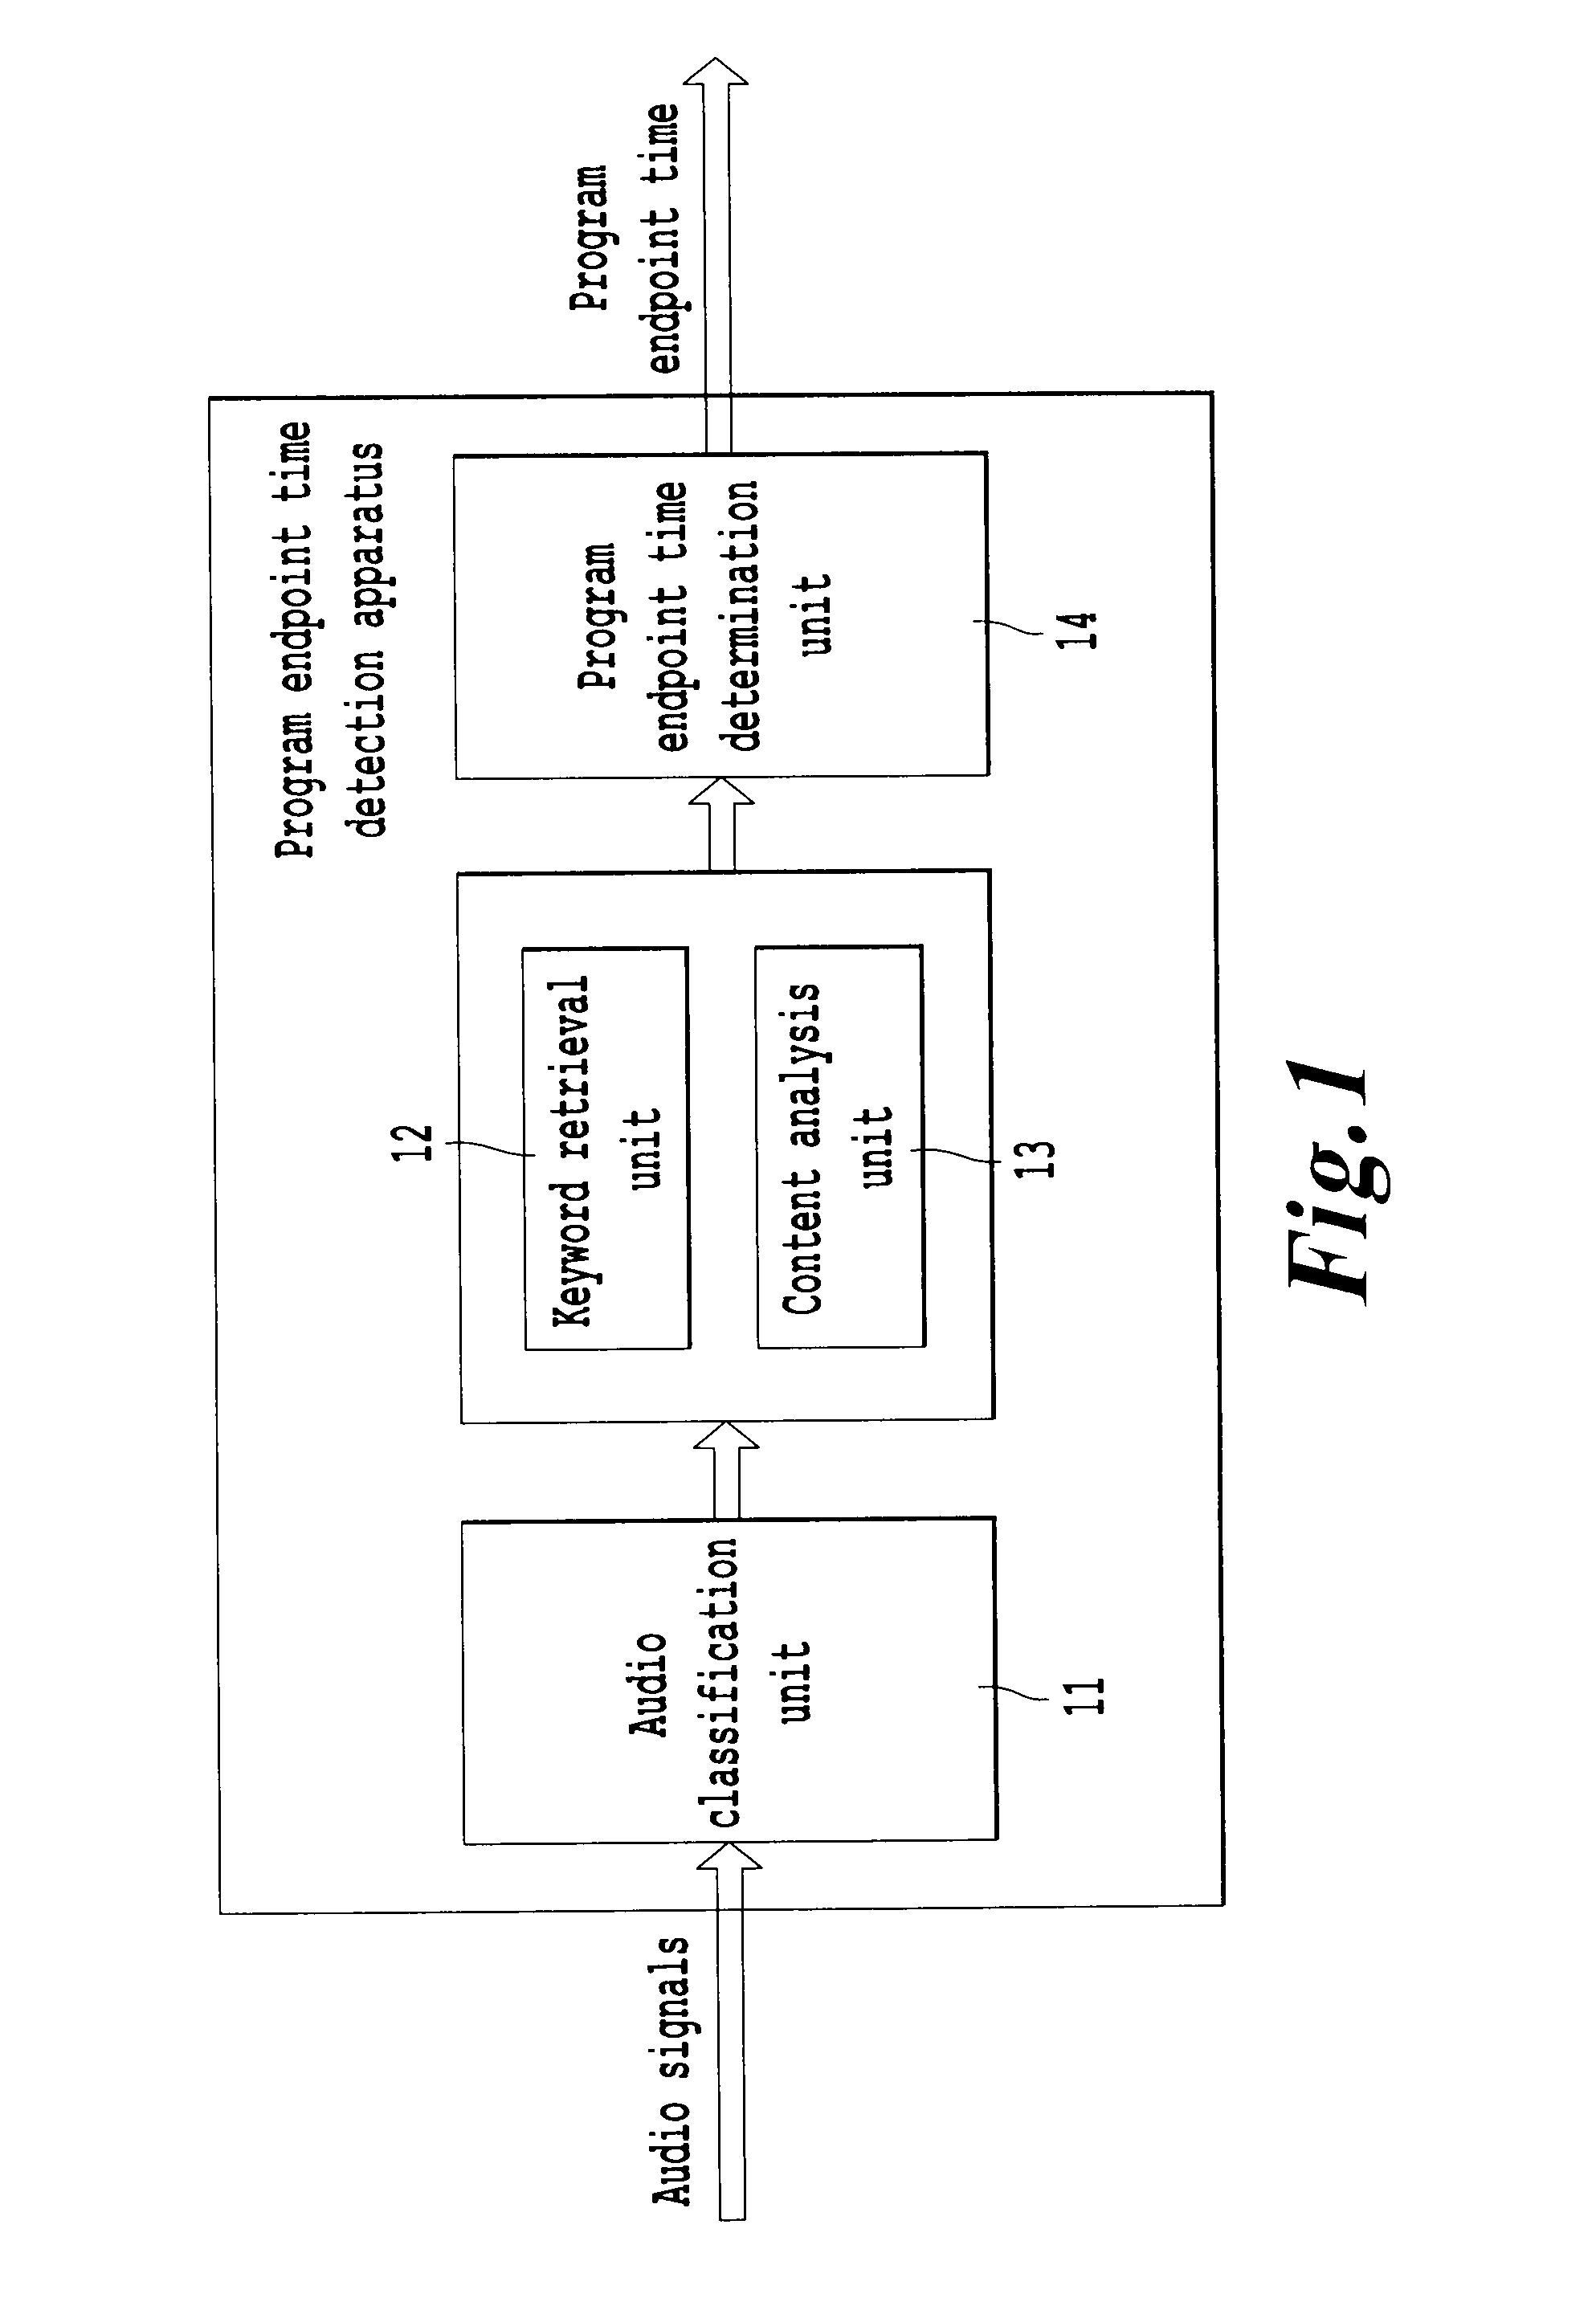 Program endpoint time detection apparatus and method, and program information retrieval system